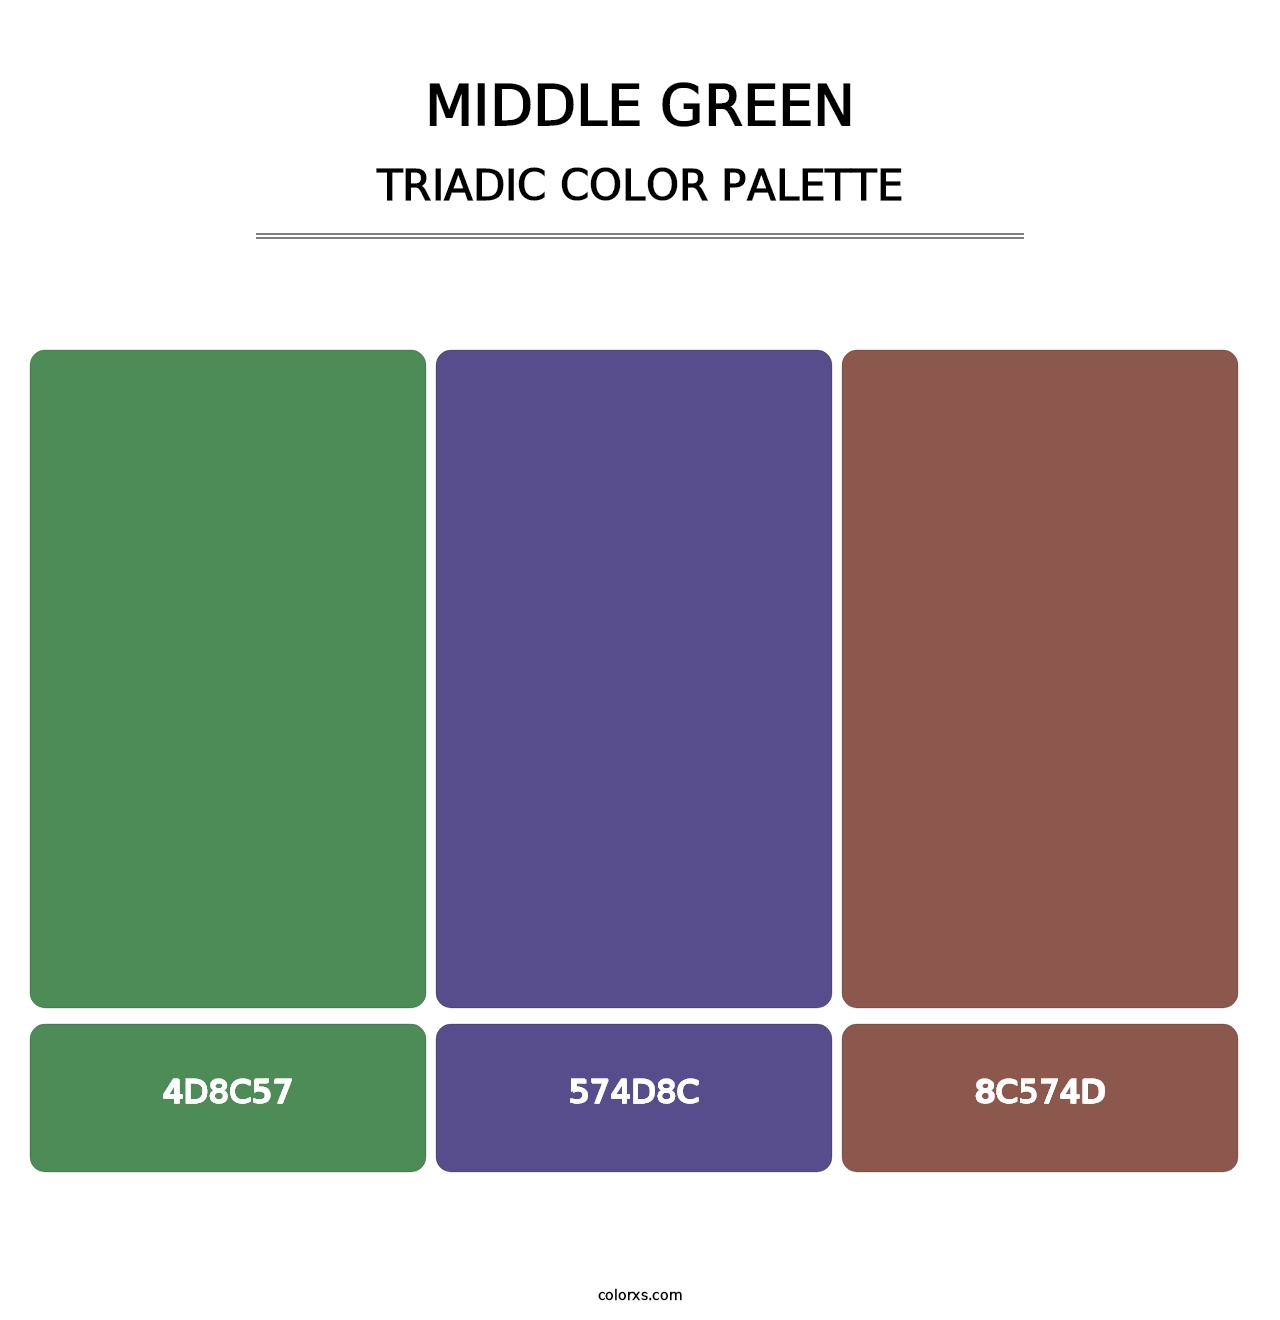 Middle Green - Triadic Color Palette